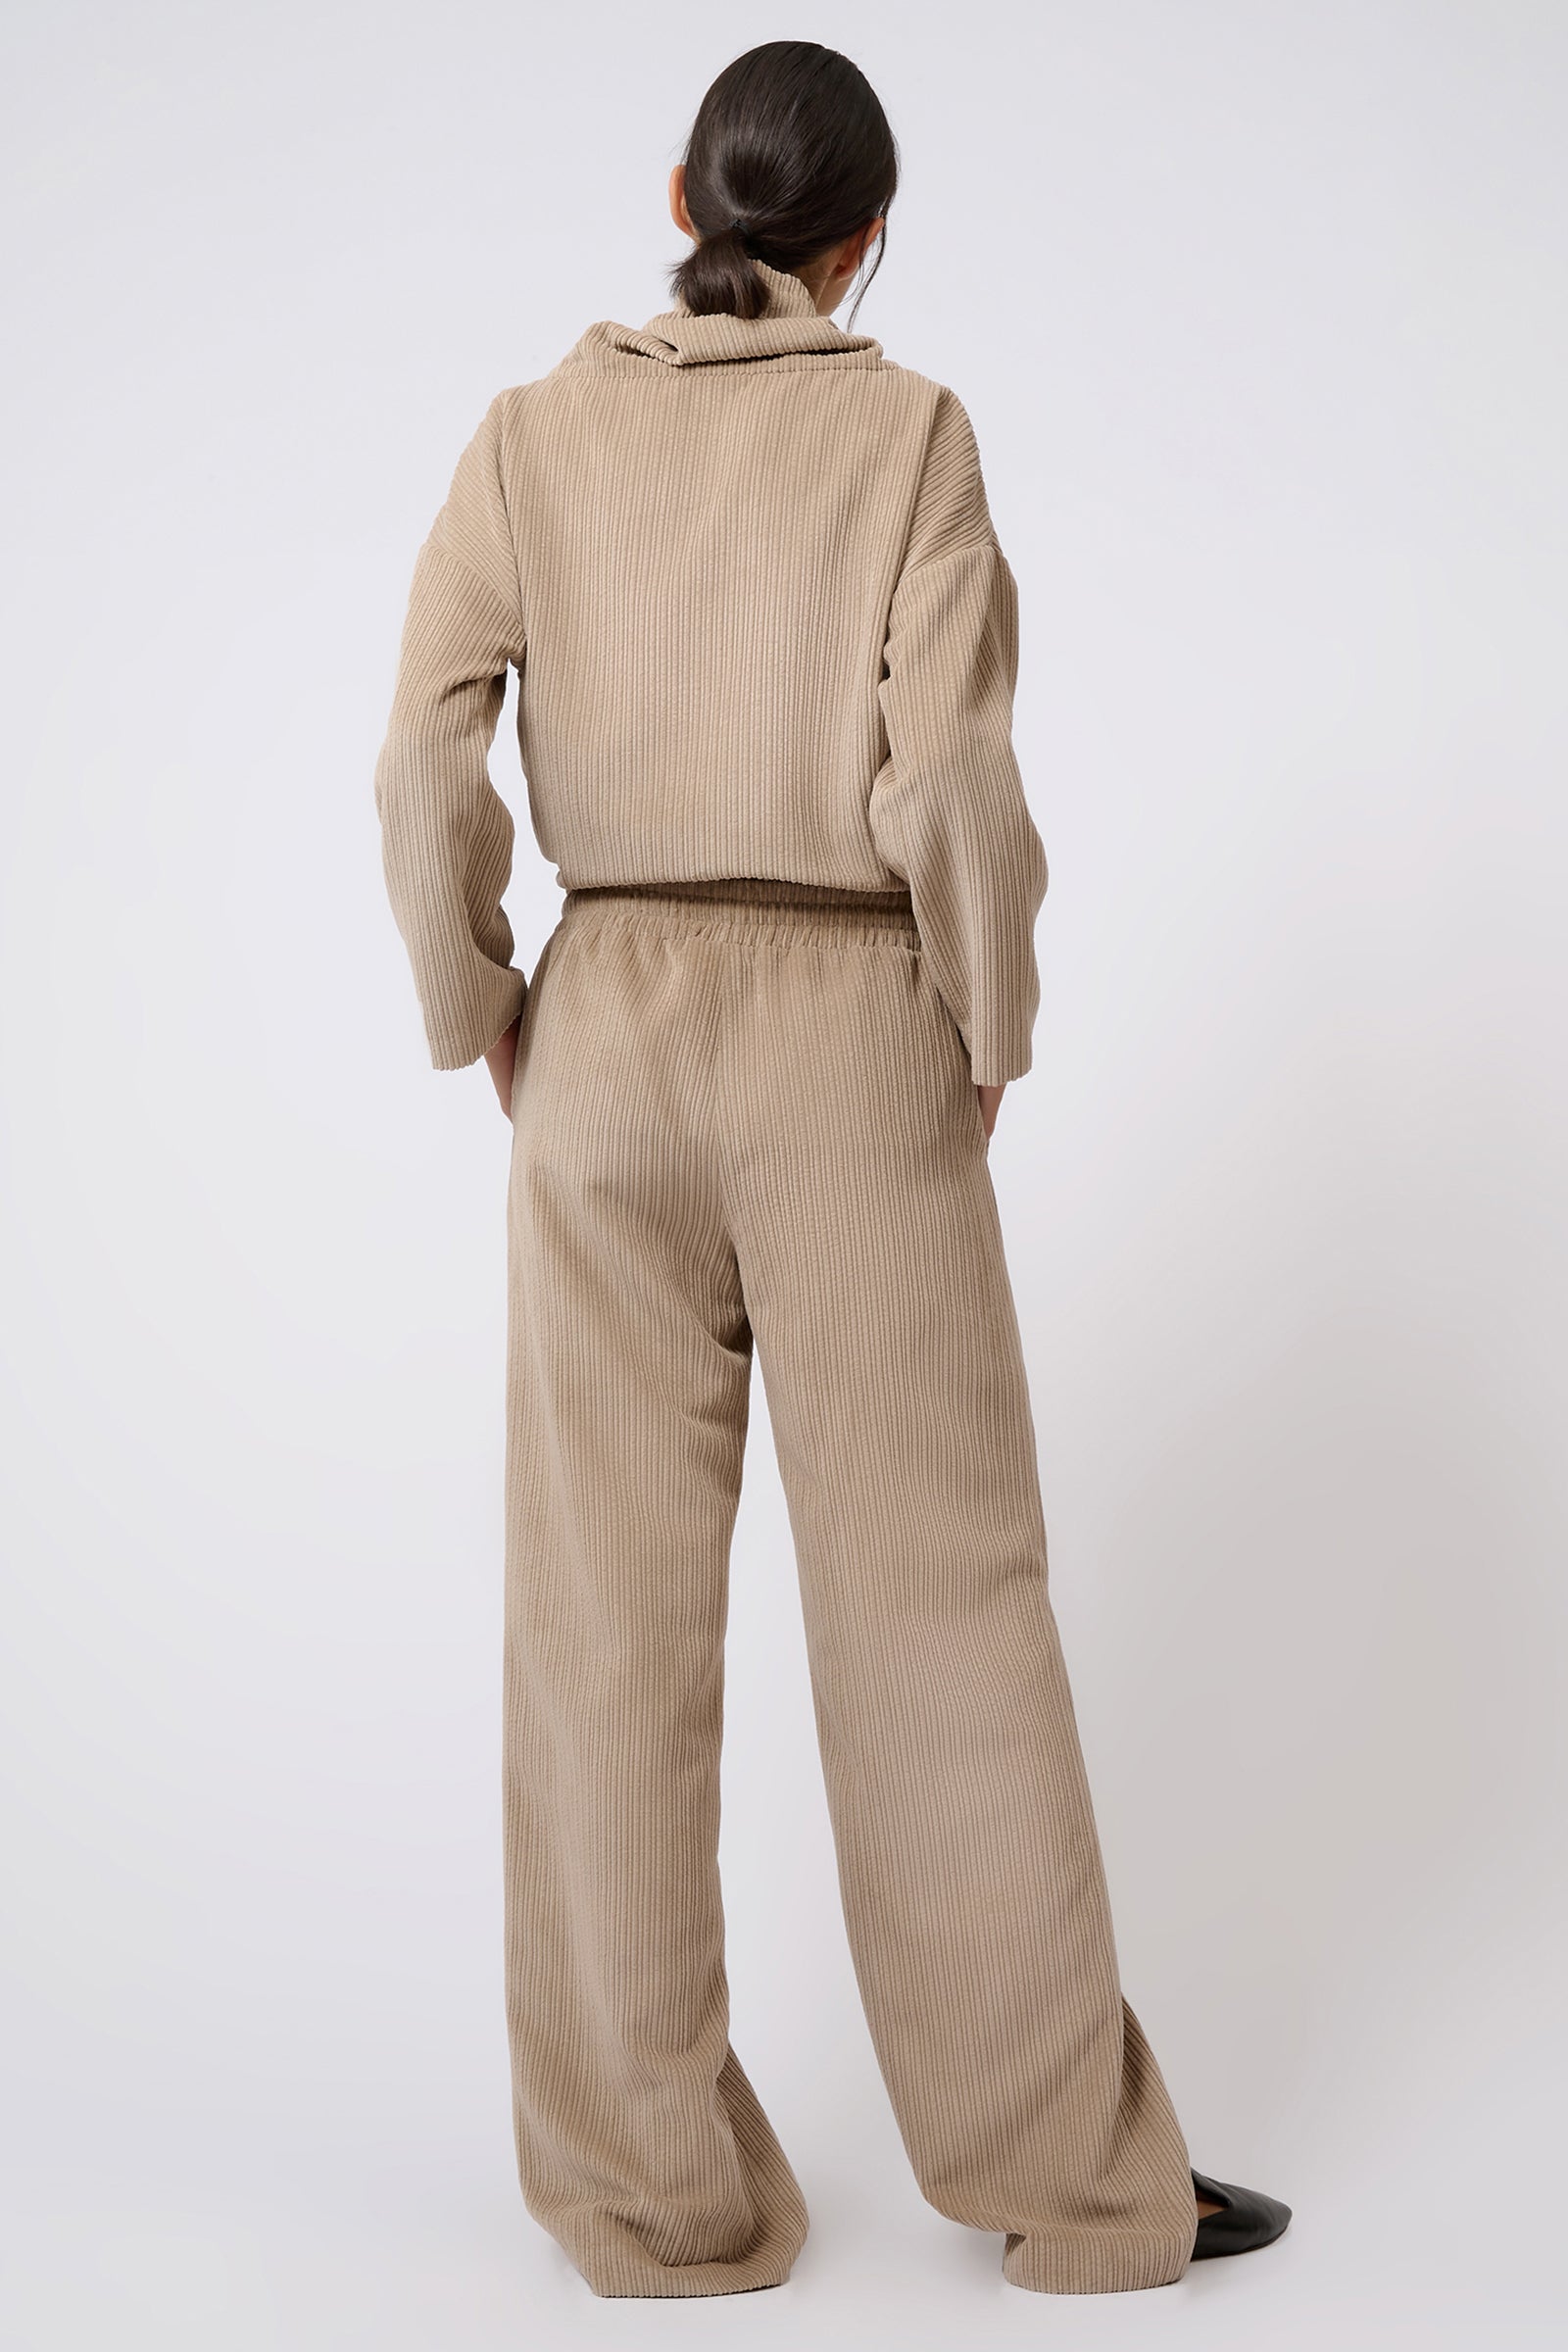 Kal Rieman Debbie Drawstring Pant in Beige on Model with Hand in Pocket Full Front View